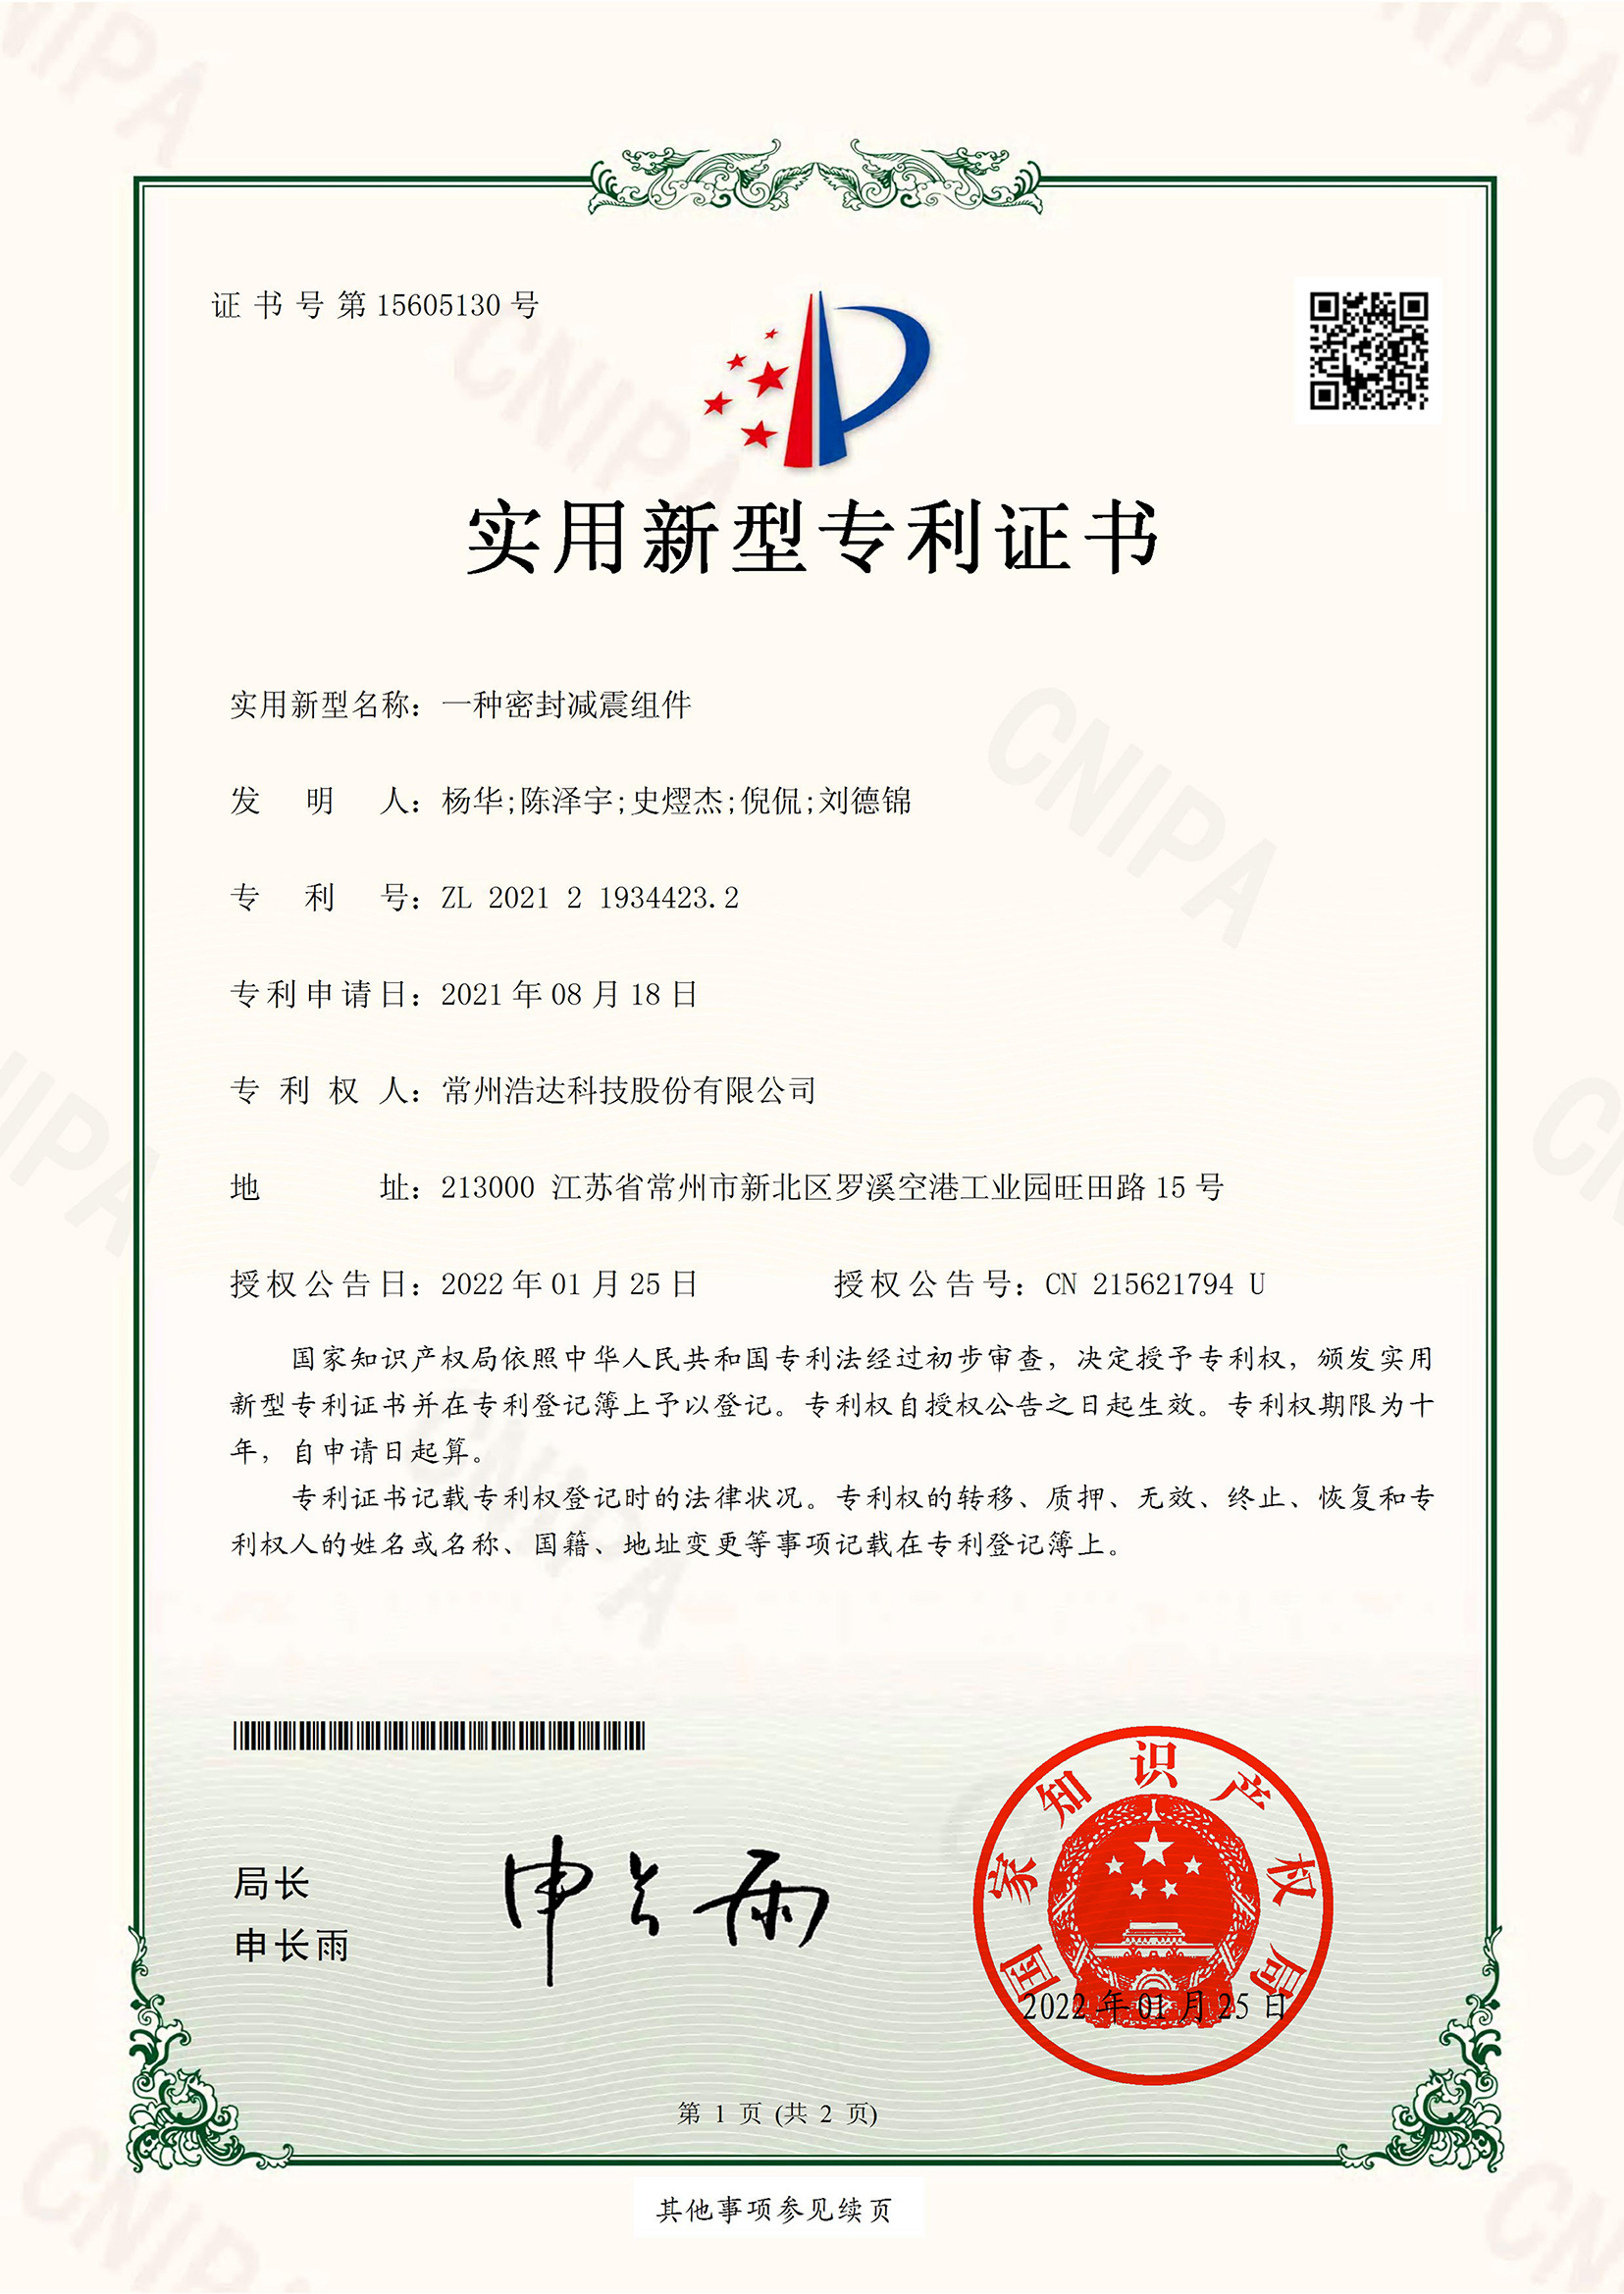 A sealed vibration damping assembly (Hoda Certificate)